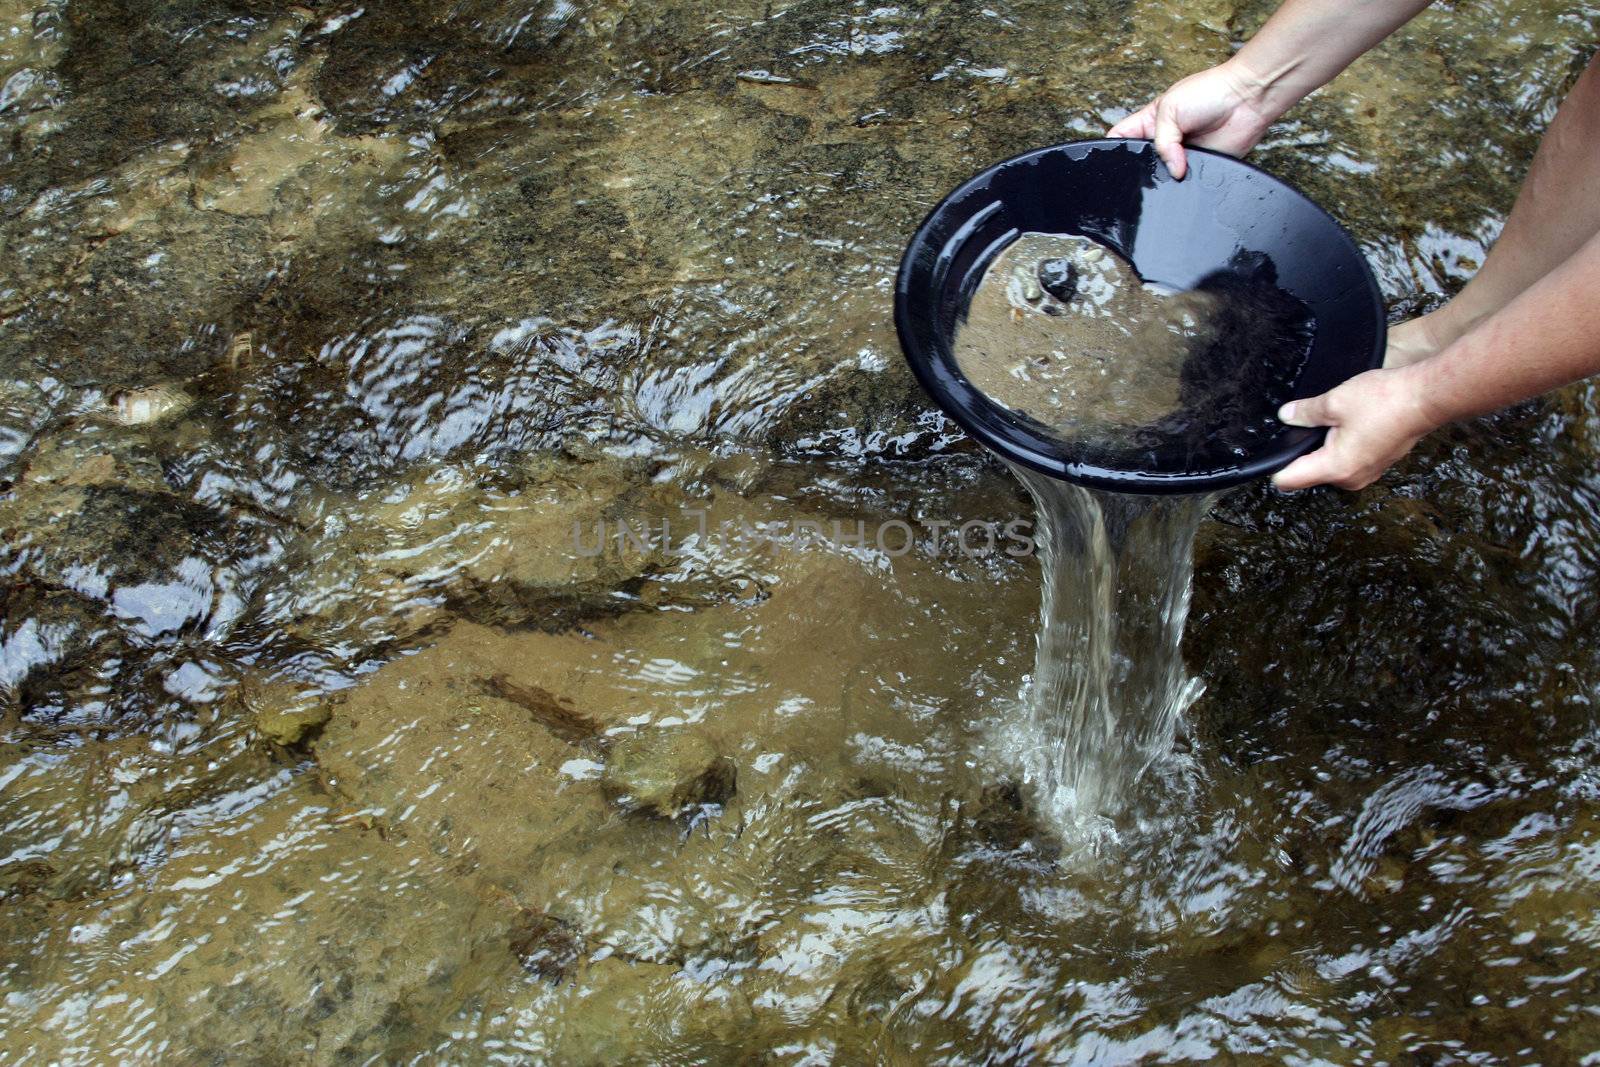 Panning for gold in a northern michigan stream